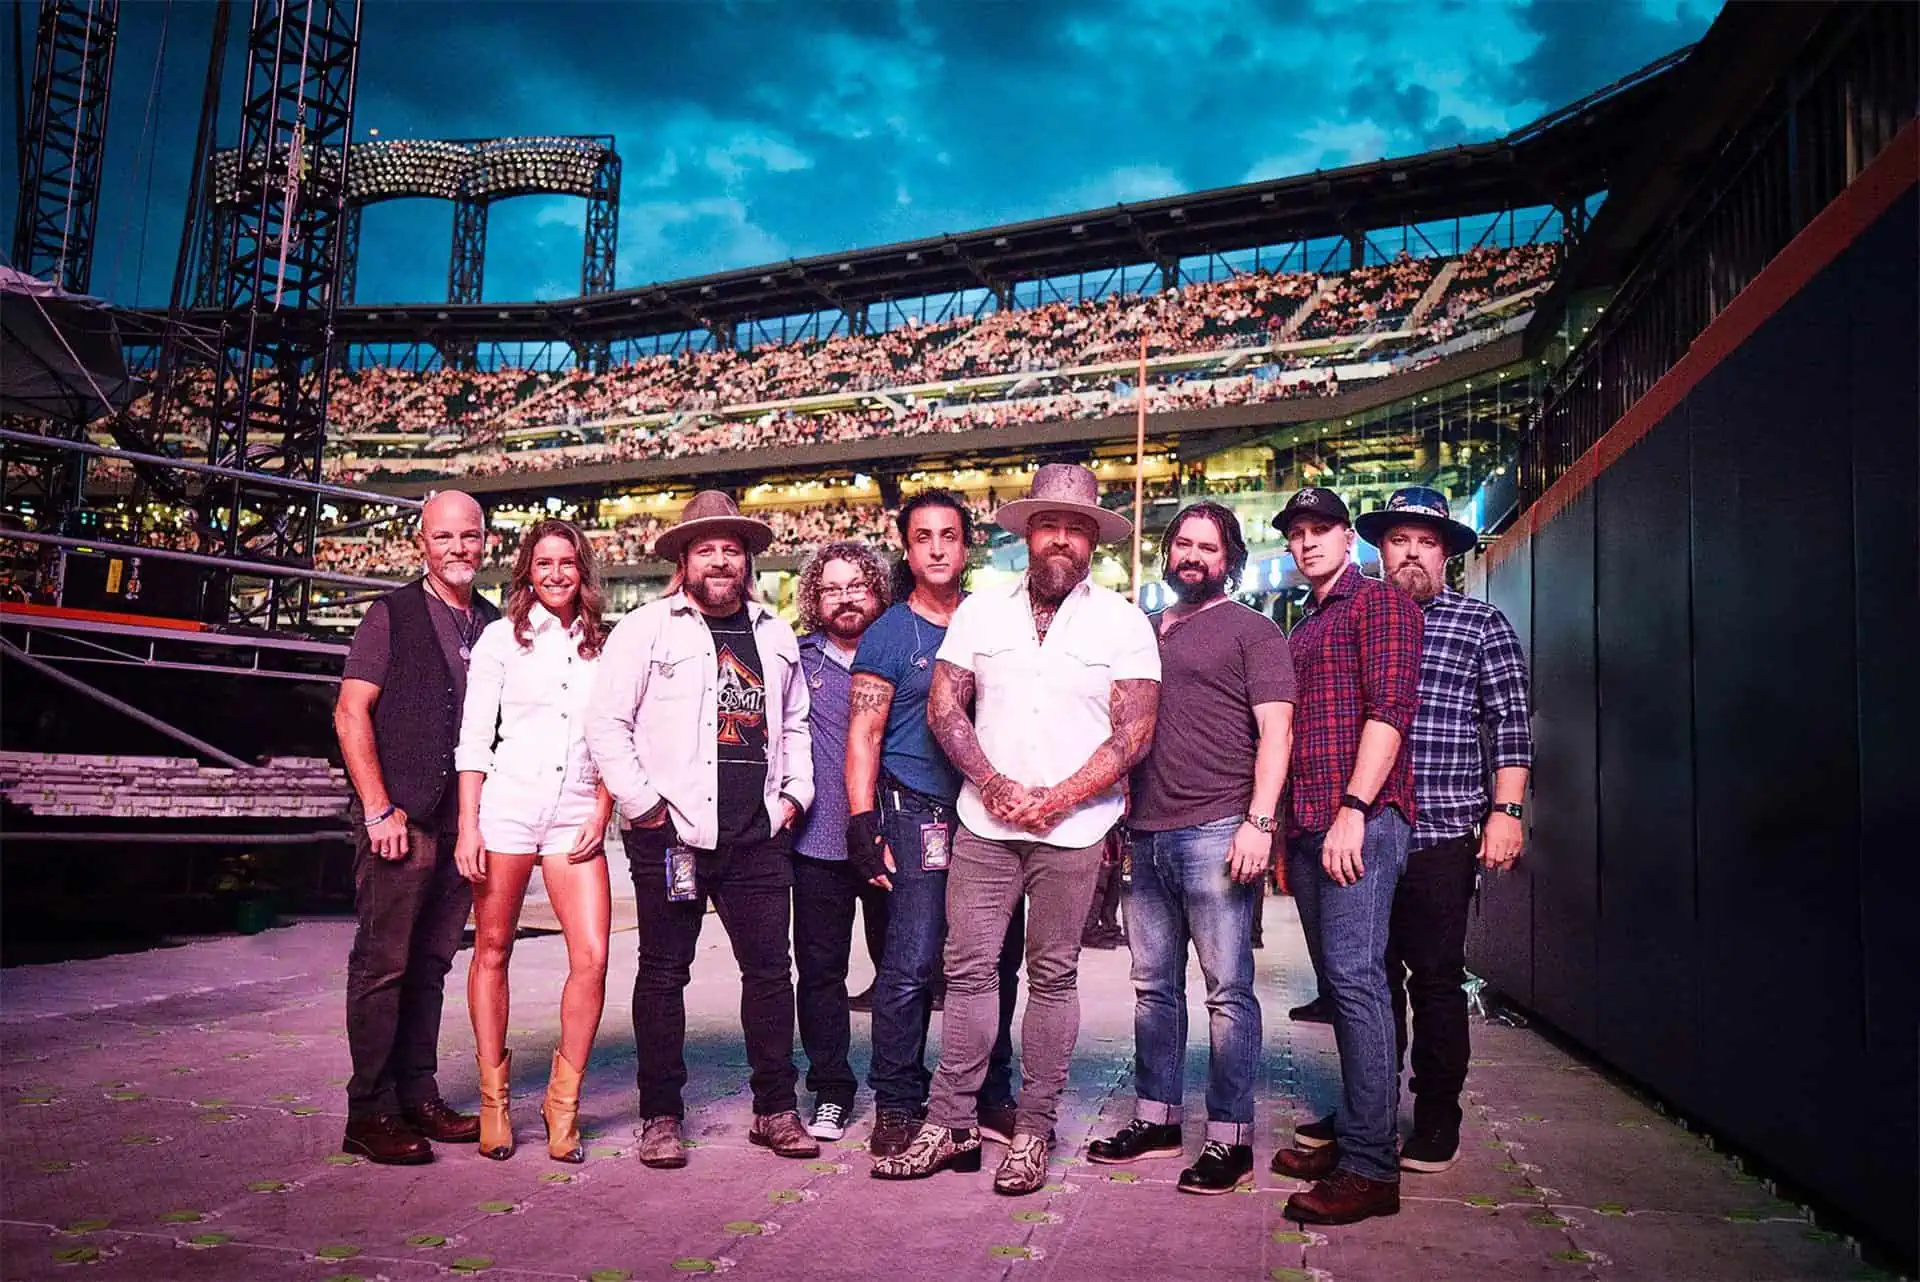 The Zac Brown Band stands in front of a full arena